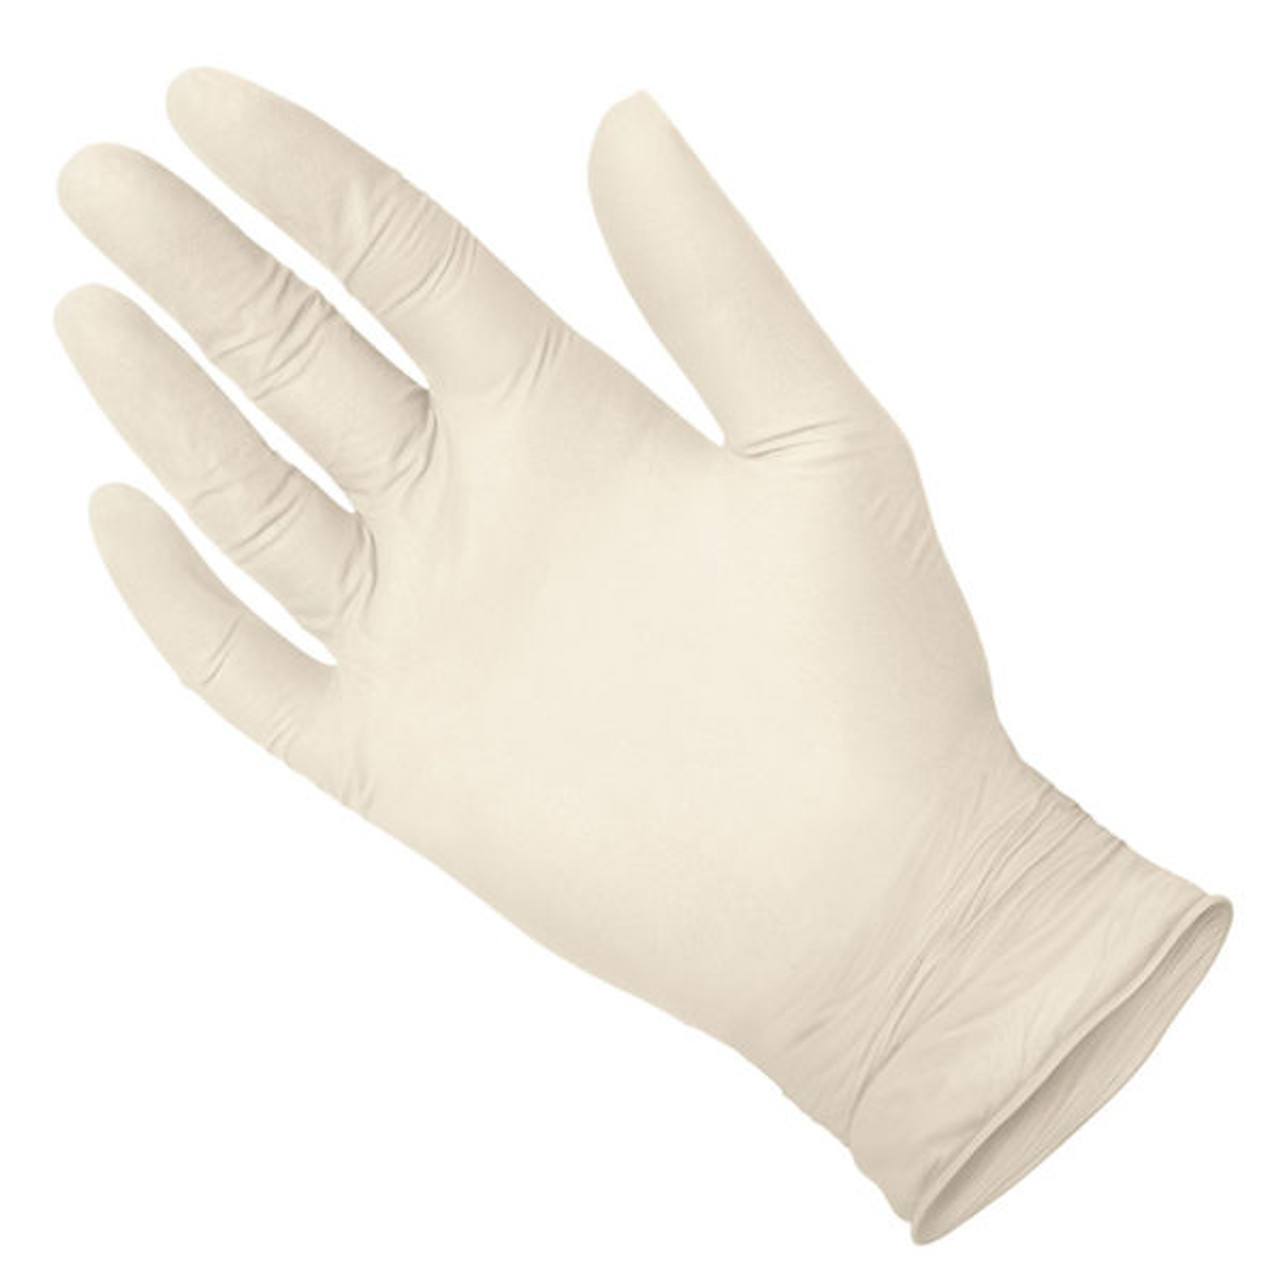 Medgluv Latex Exam Glove, Textured, Low Protein, 6.5mil, Large 100/bx, 10/cs